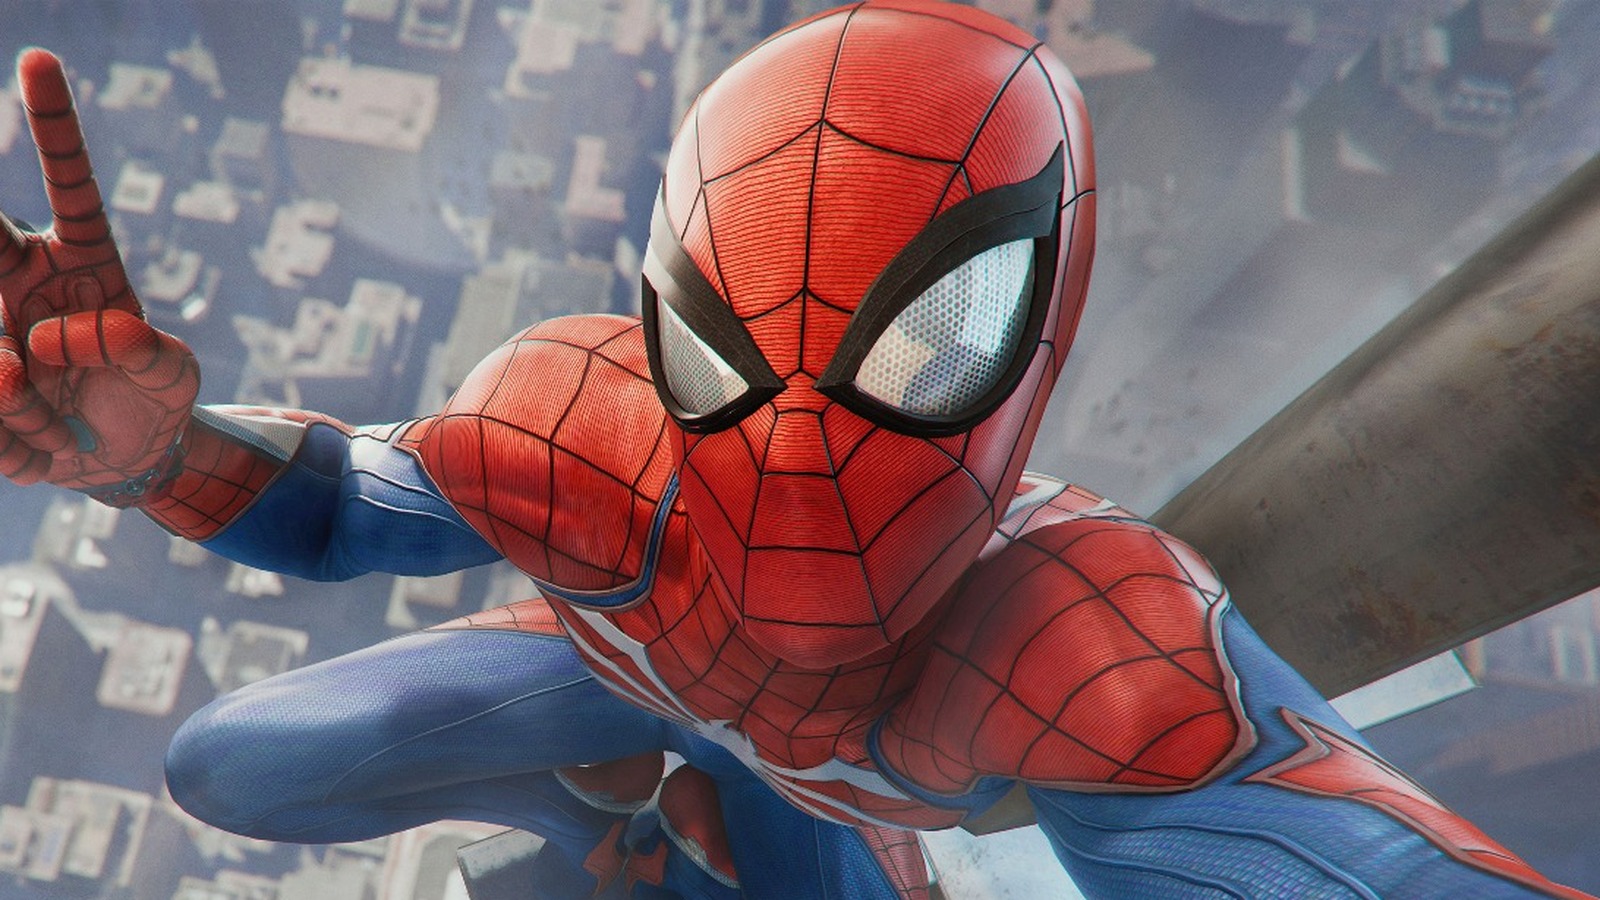 Spider-Man coming to PC means much more than just Spider-Man